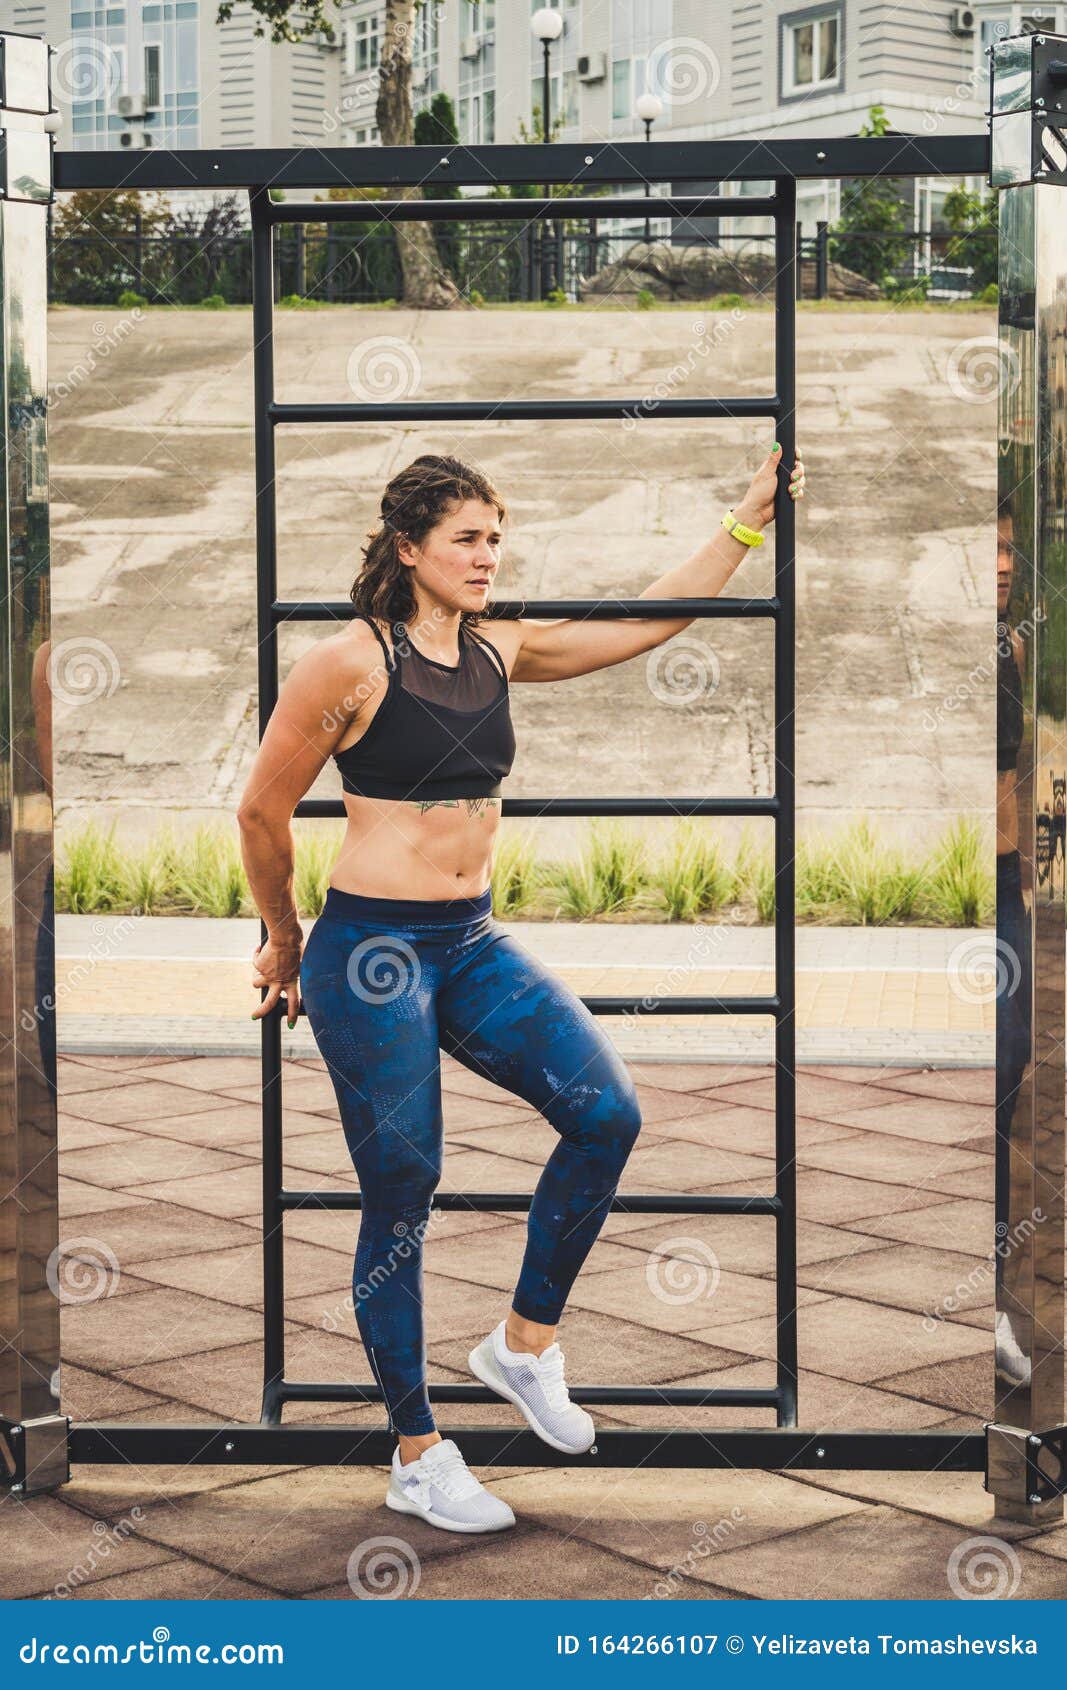 30 Minute Street workout women for Build Muscle